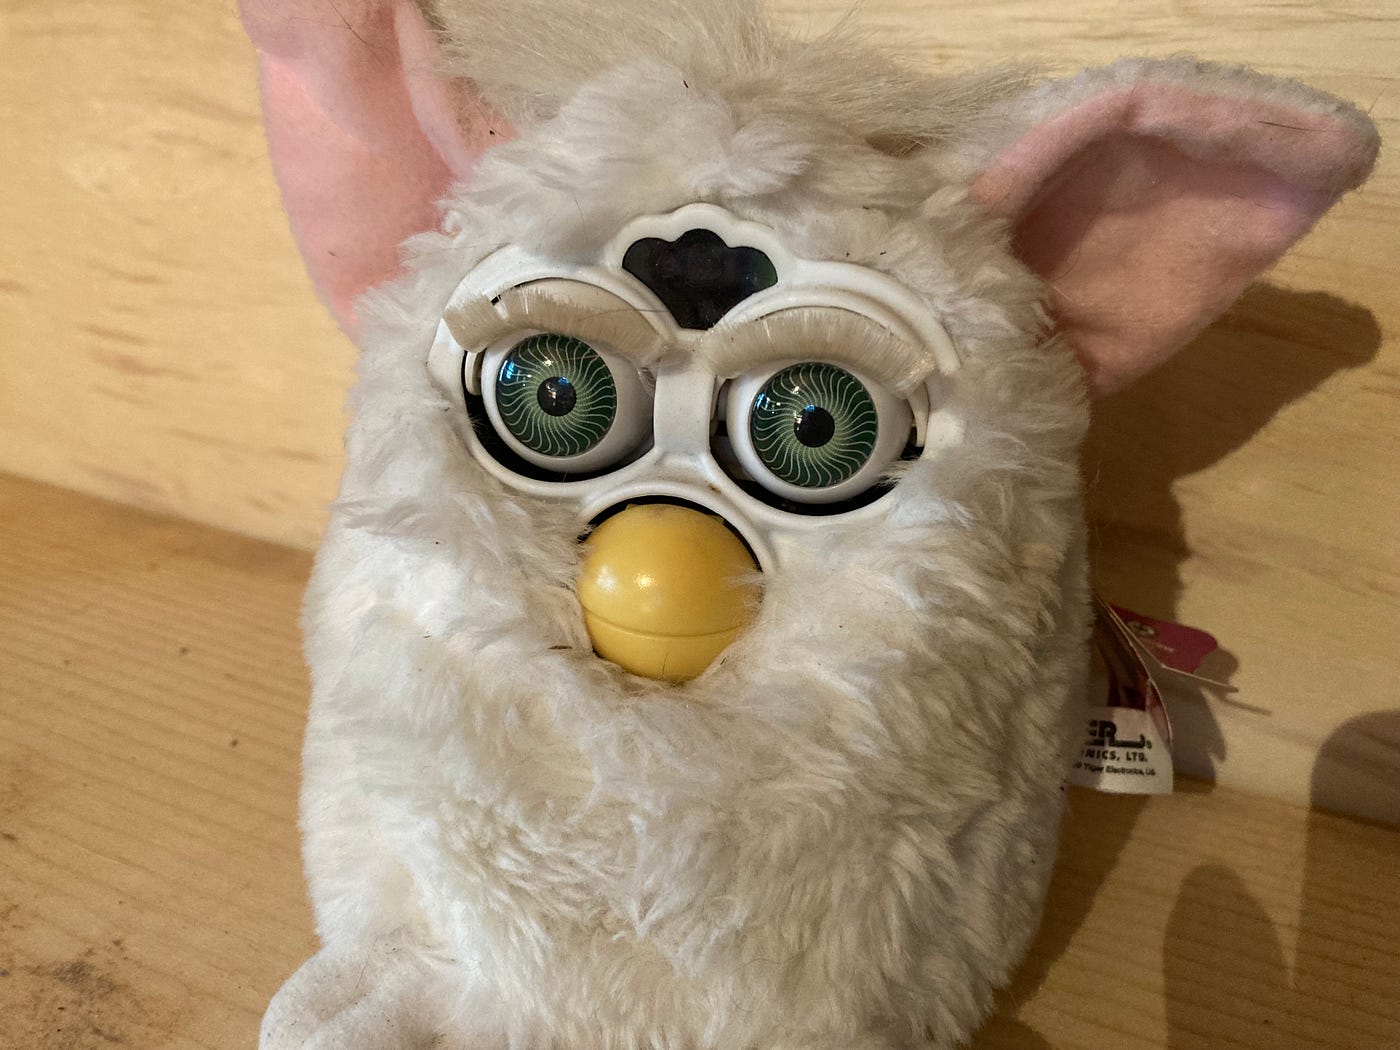 I Accidentally Woke the Furby from His Coma | by srstowers | Boomers,  Bitches, and Babes | Medium